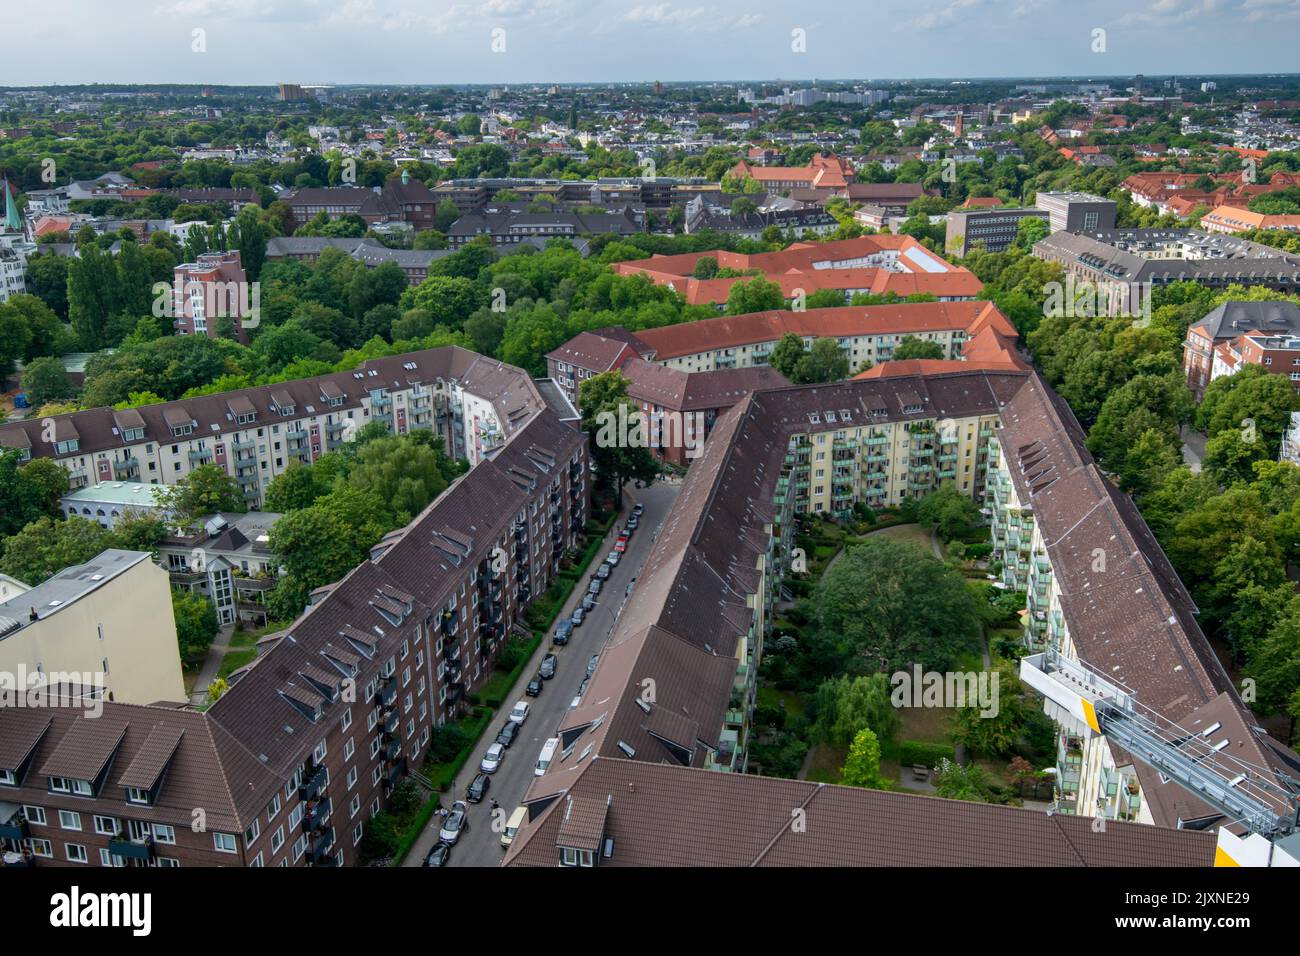 Top view of buildings with courtyards in Hamburg, Germany. Typical European architecture. Stock Photo